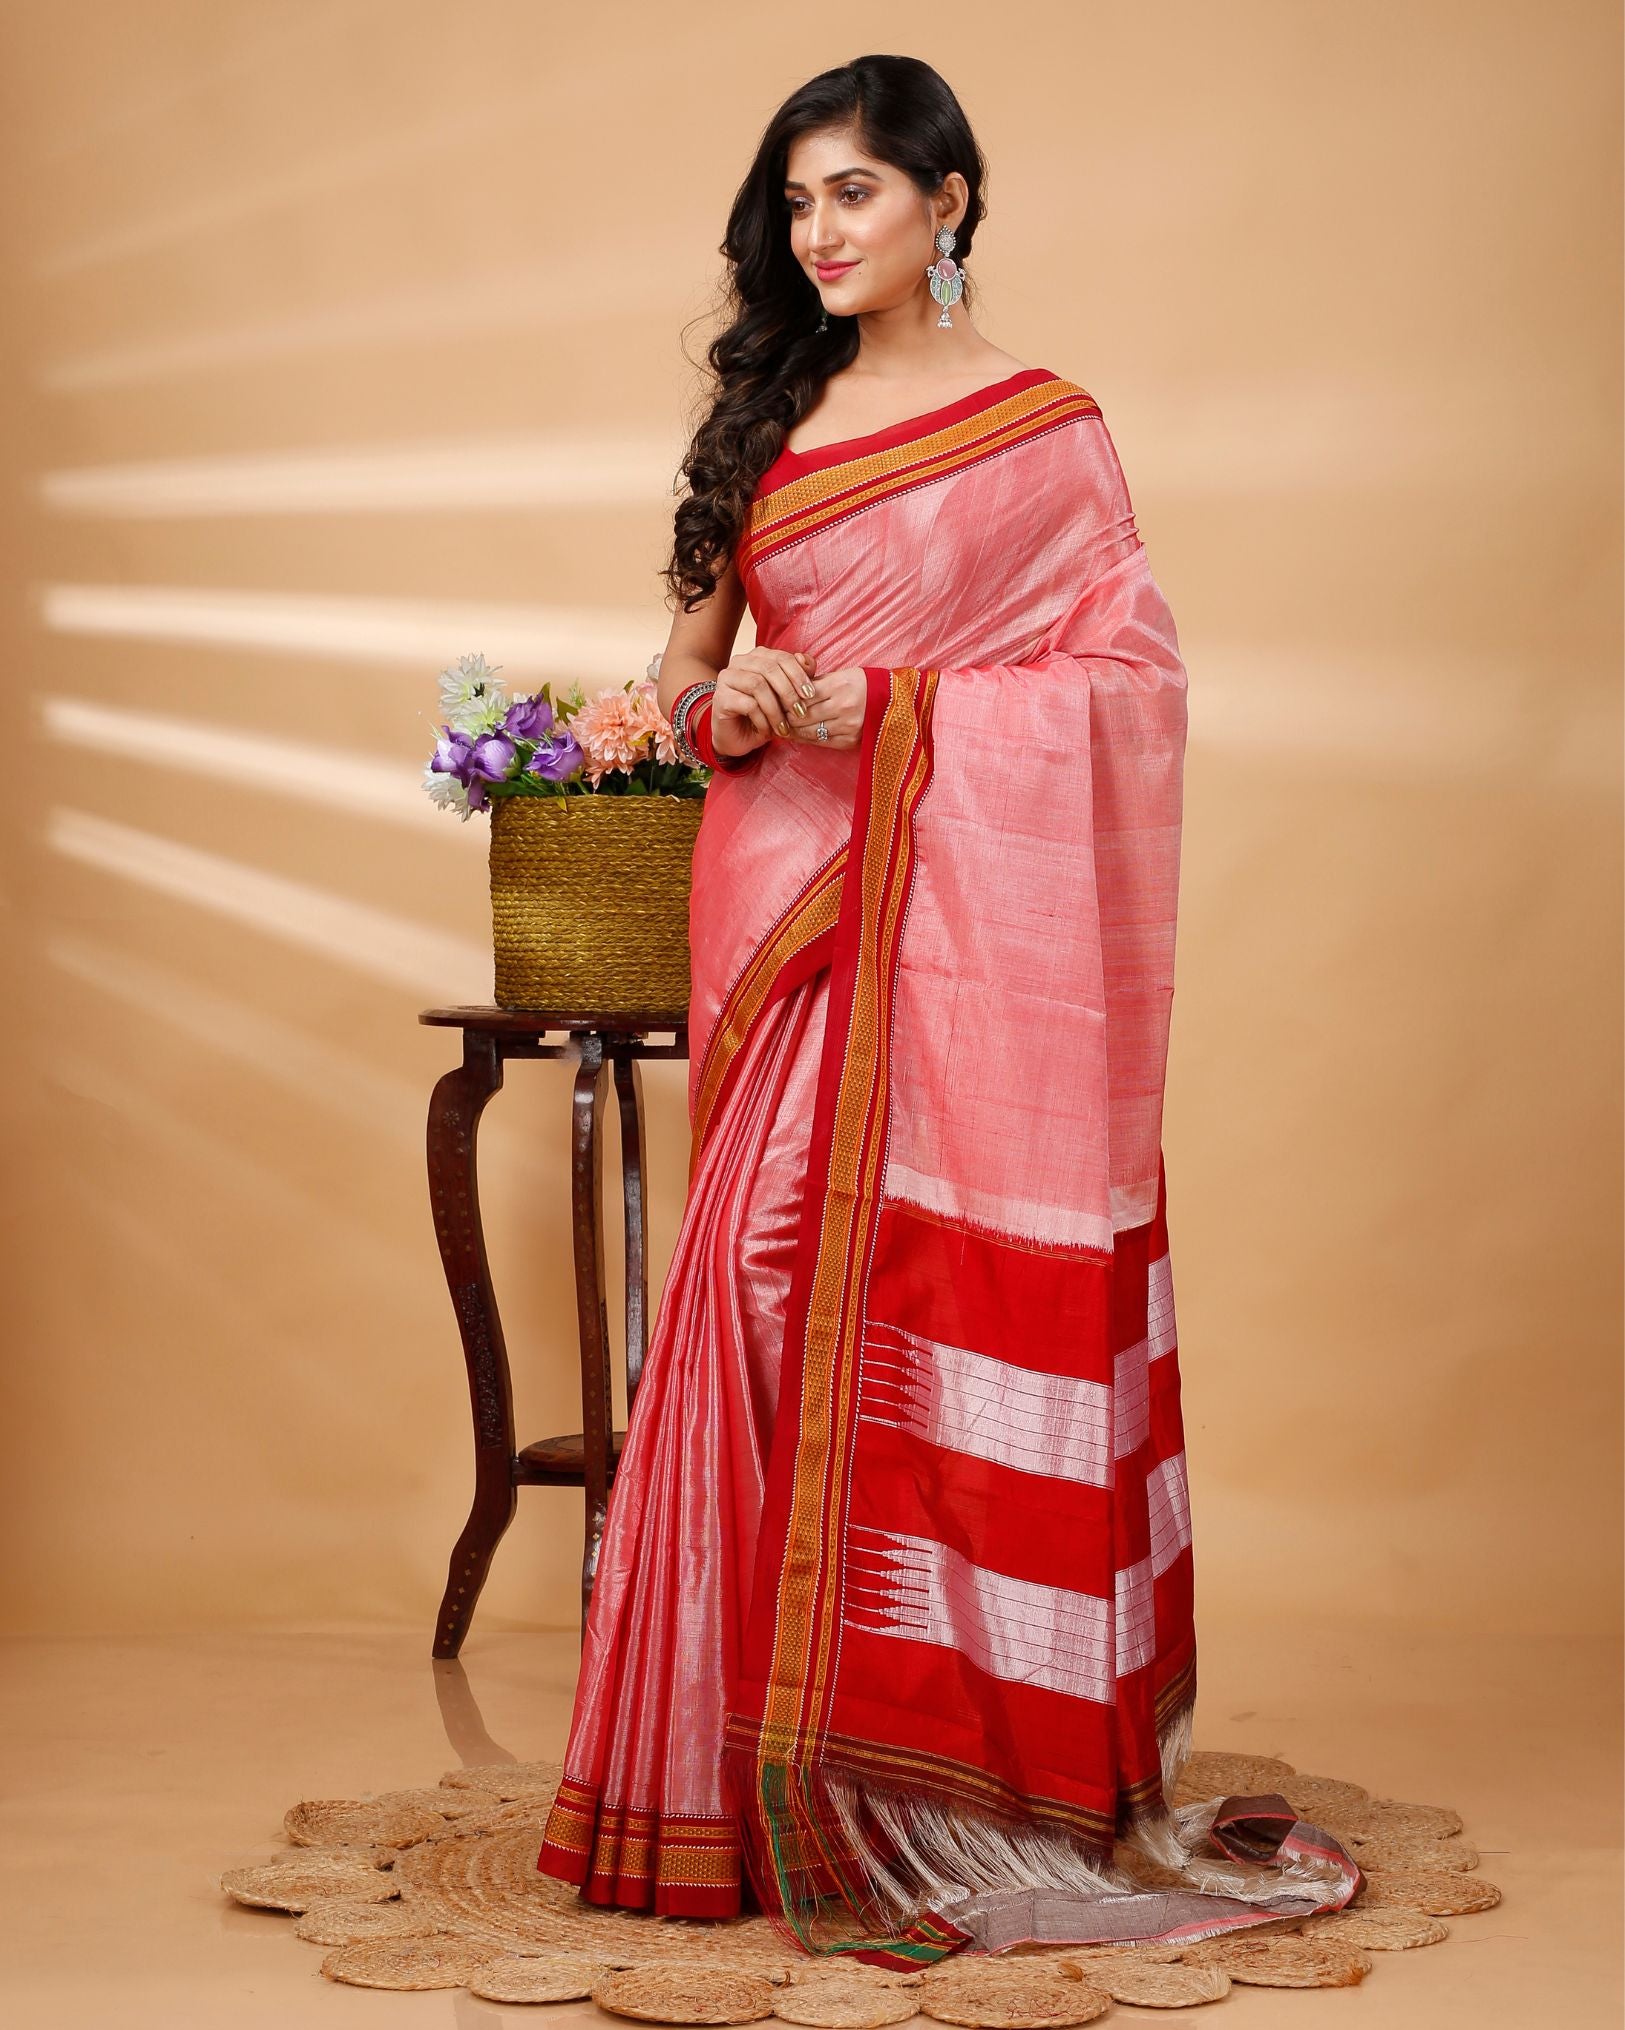 ILKAL Handloom Cotton Silk Saree Coral Pink Color with running blouse - IndieHaat